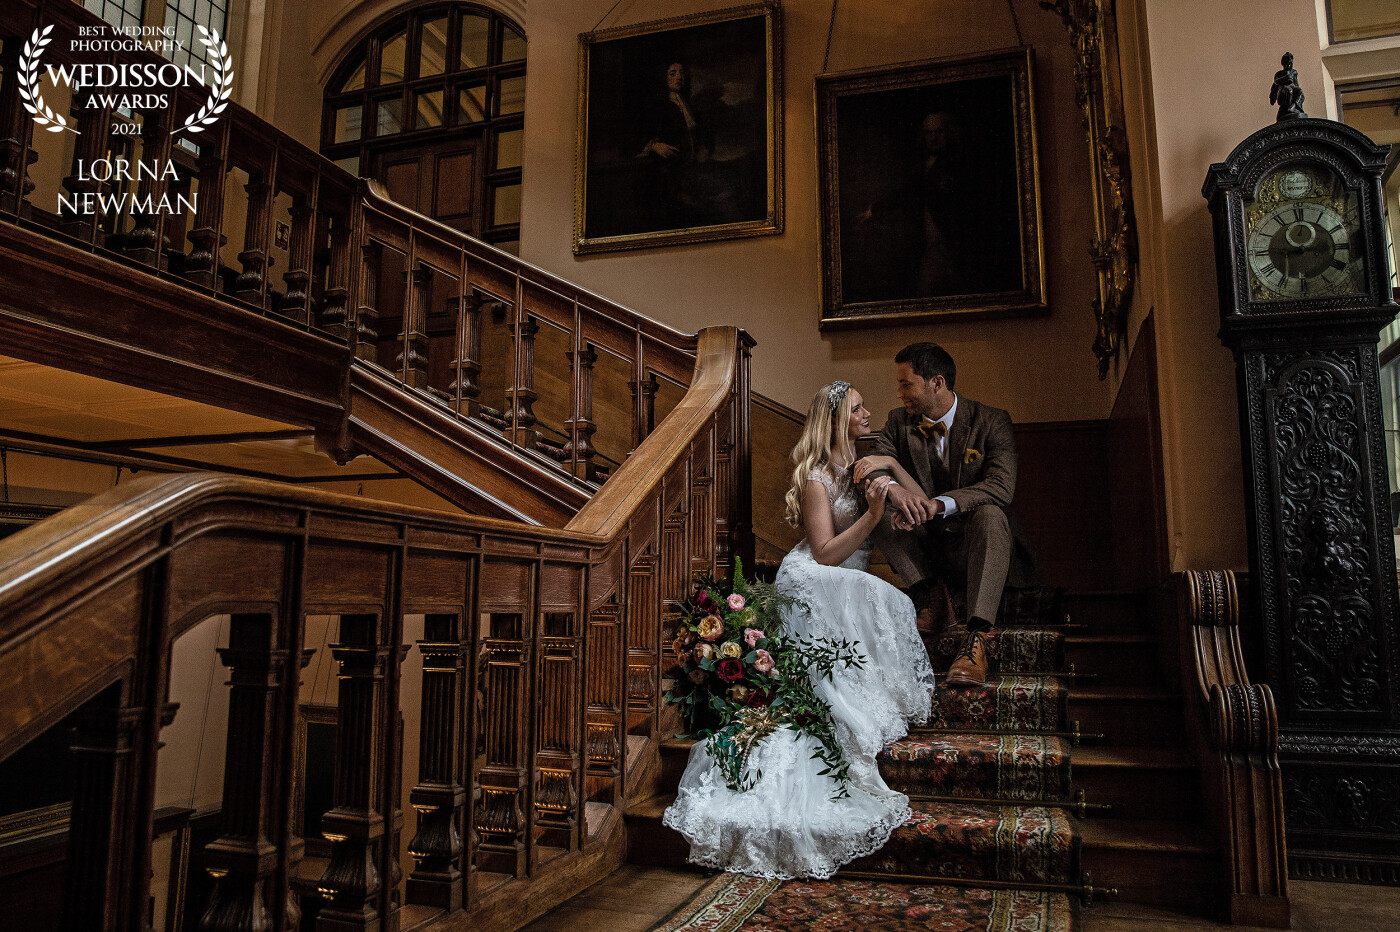 Lucy & Phil sharing a moment on the beautiful staircase at Shuttleworth House in Biggleswade, Bedfordshire (one of my favorite venues!). The staircase every bride walks down on her way to get married.